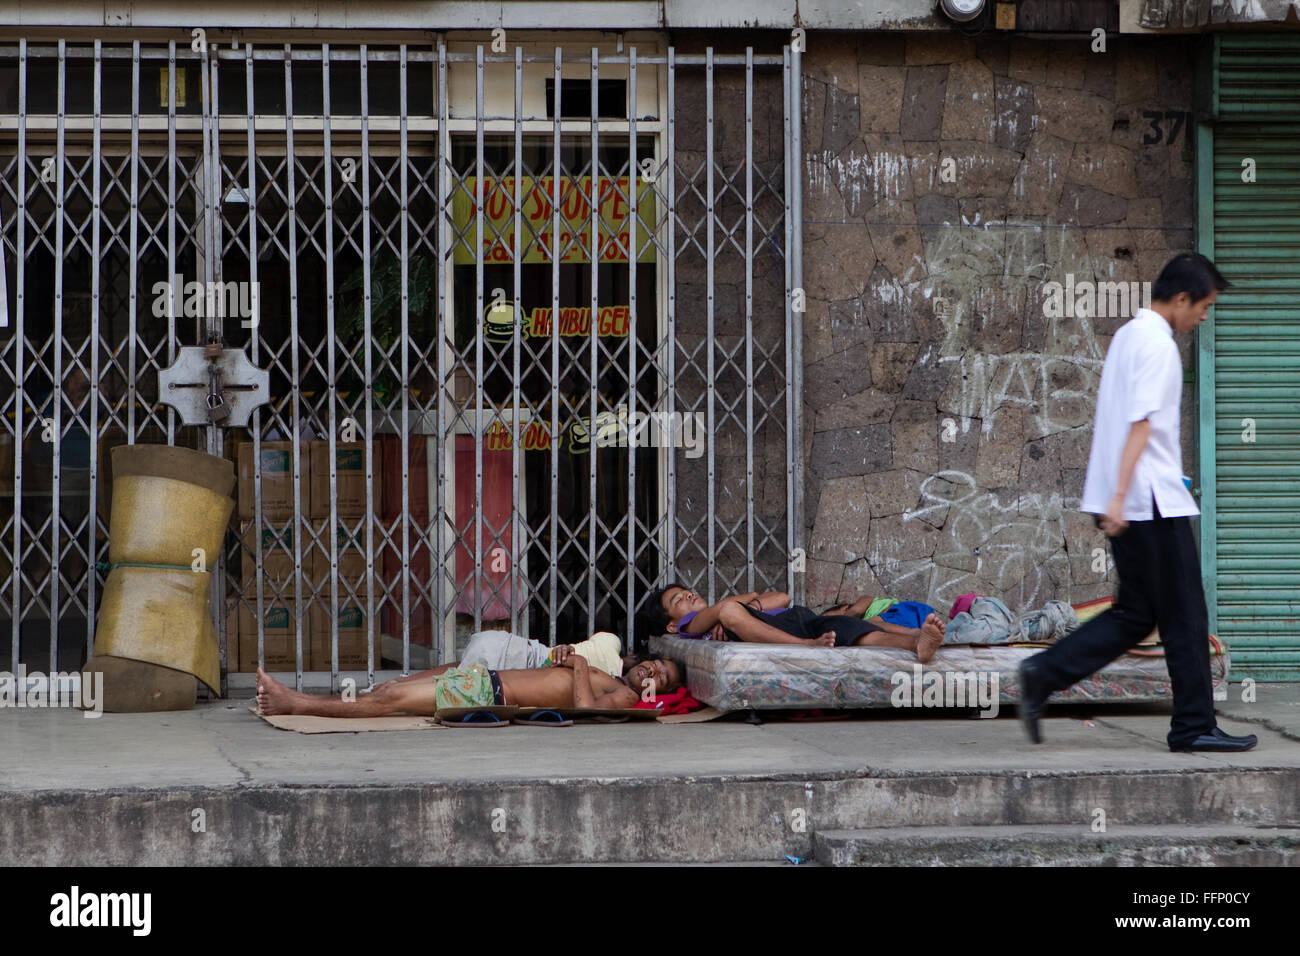 Within Philippine Cities homeless people,which include children & entire families can be seen sleeping on sidewalks. Stock Photo